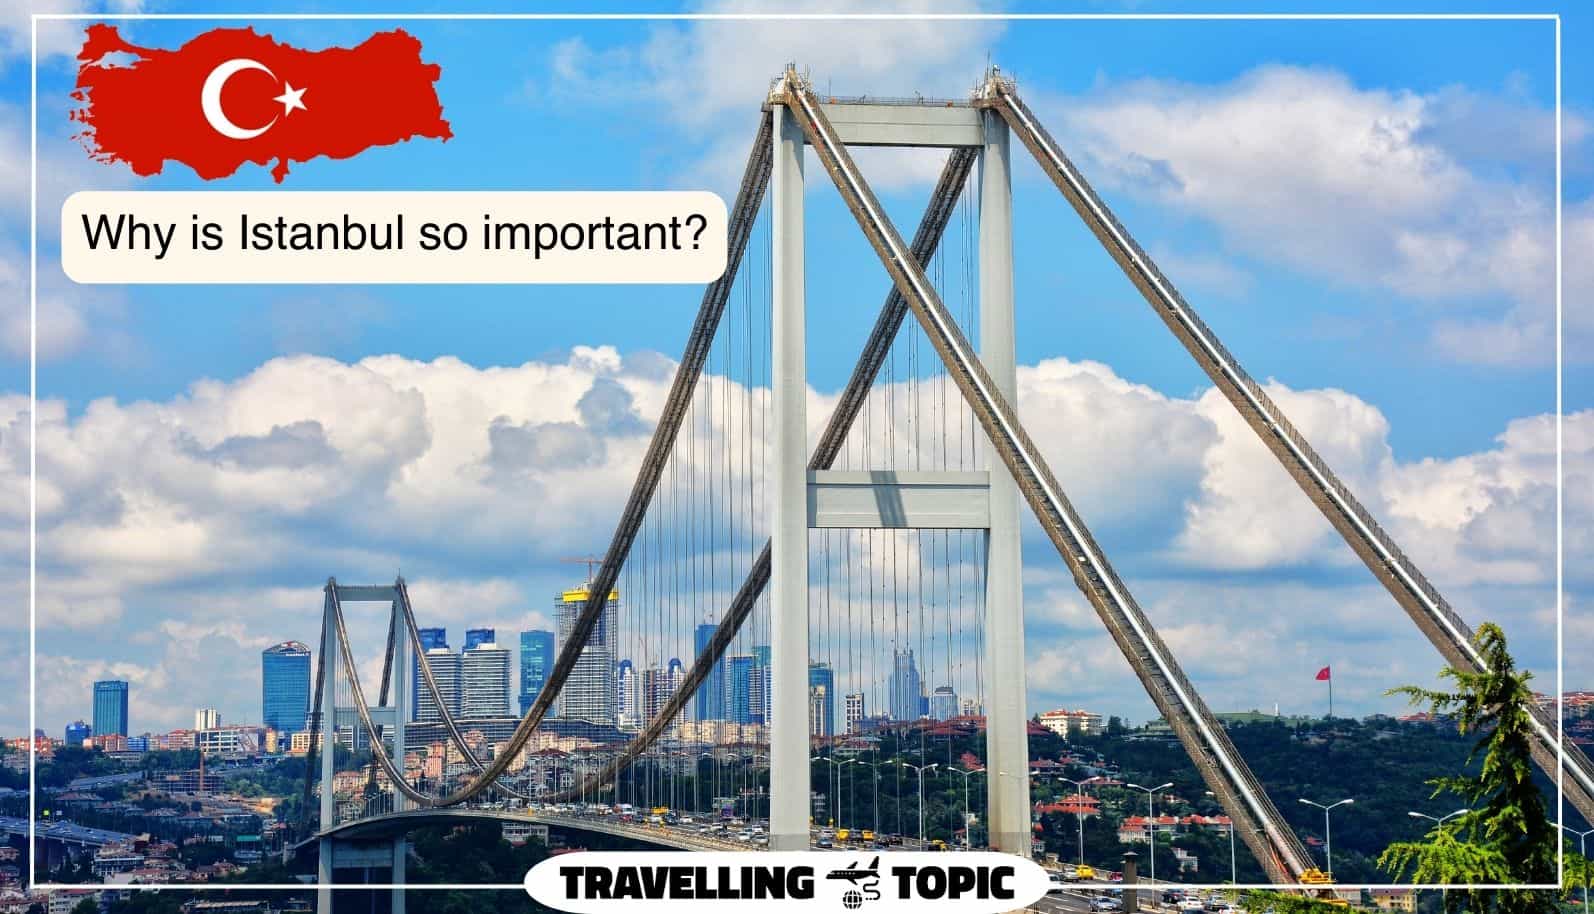 Istanbul is important